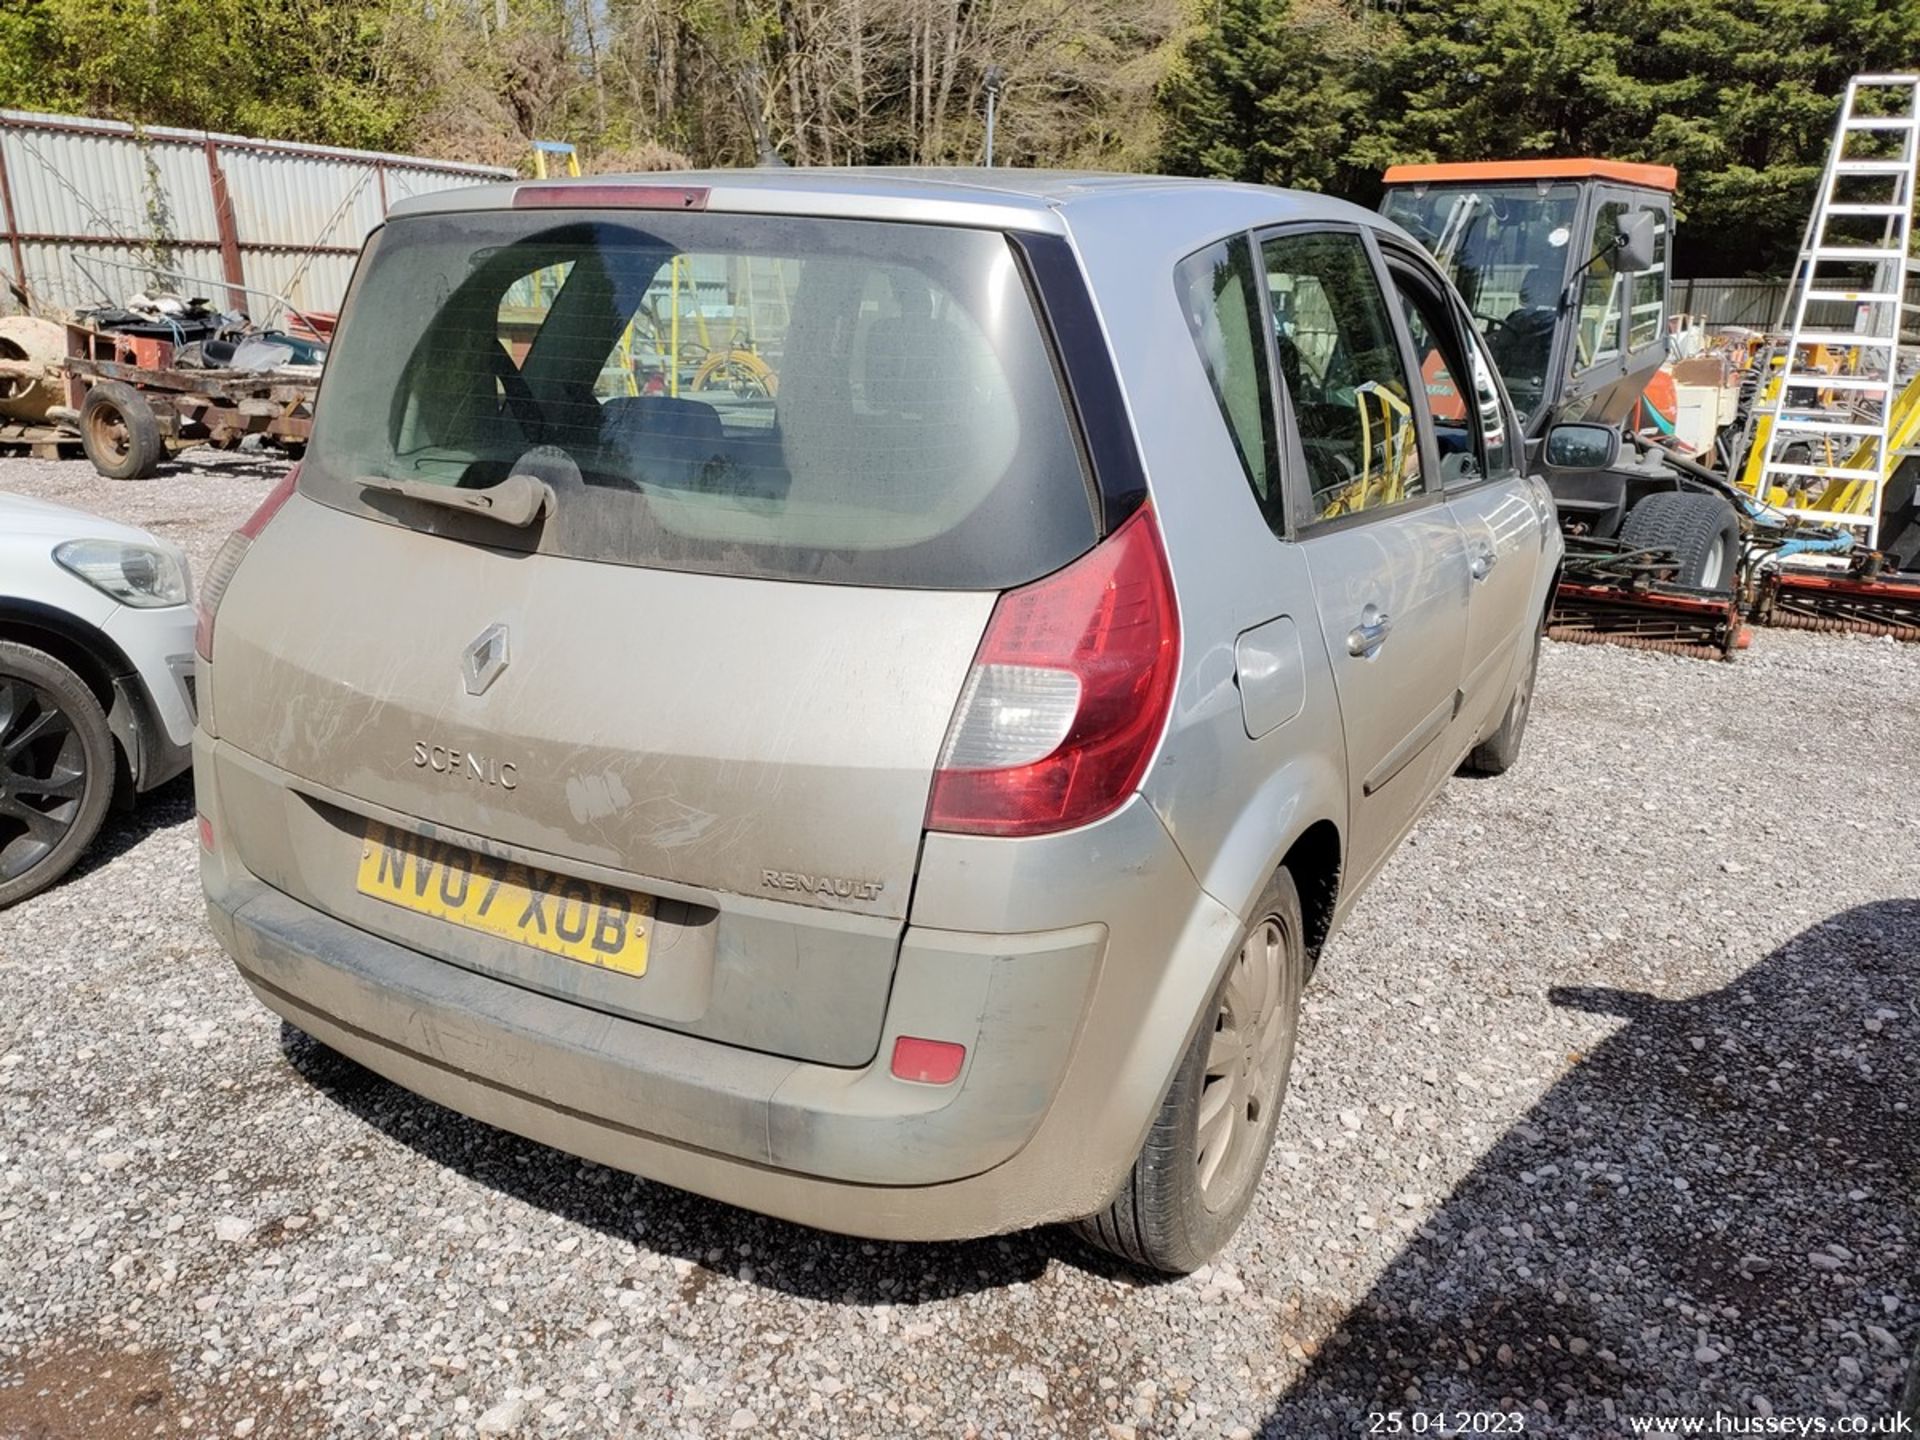 07/07 RENAULT SCENIC DYN VVT - 1598cc 5dr MPV (Silver) - Image 20 of 34